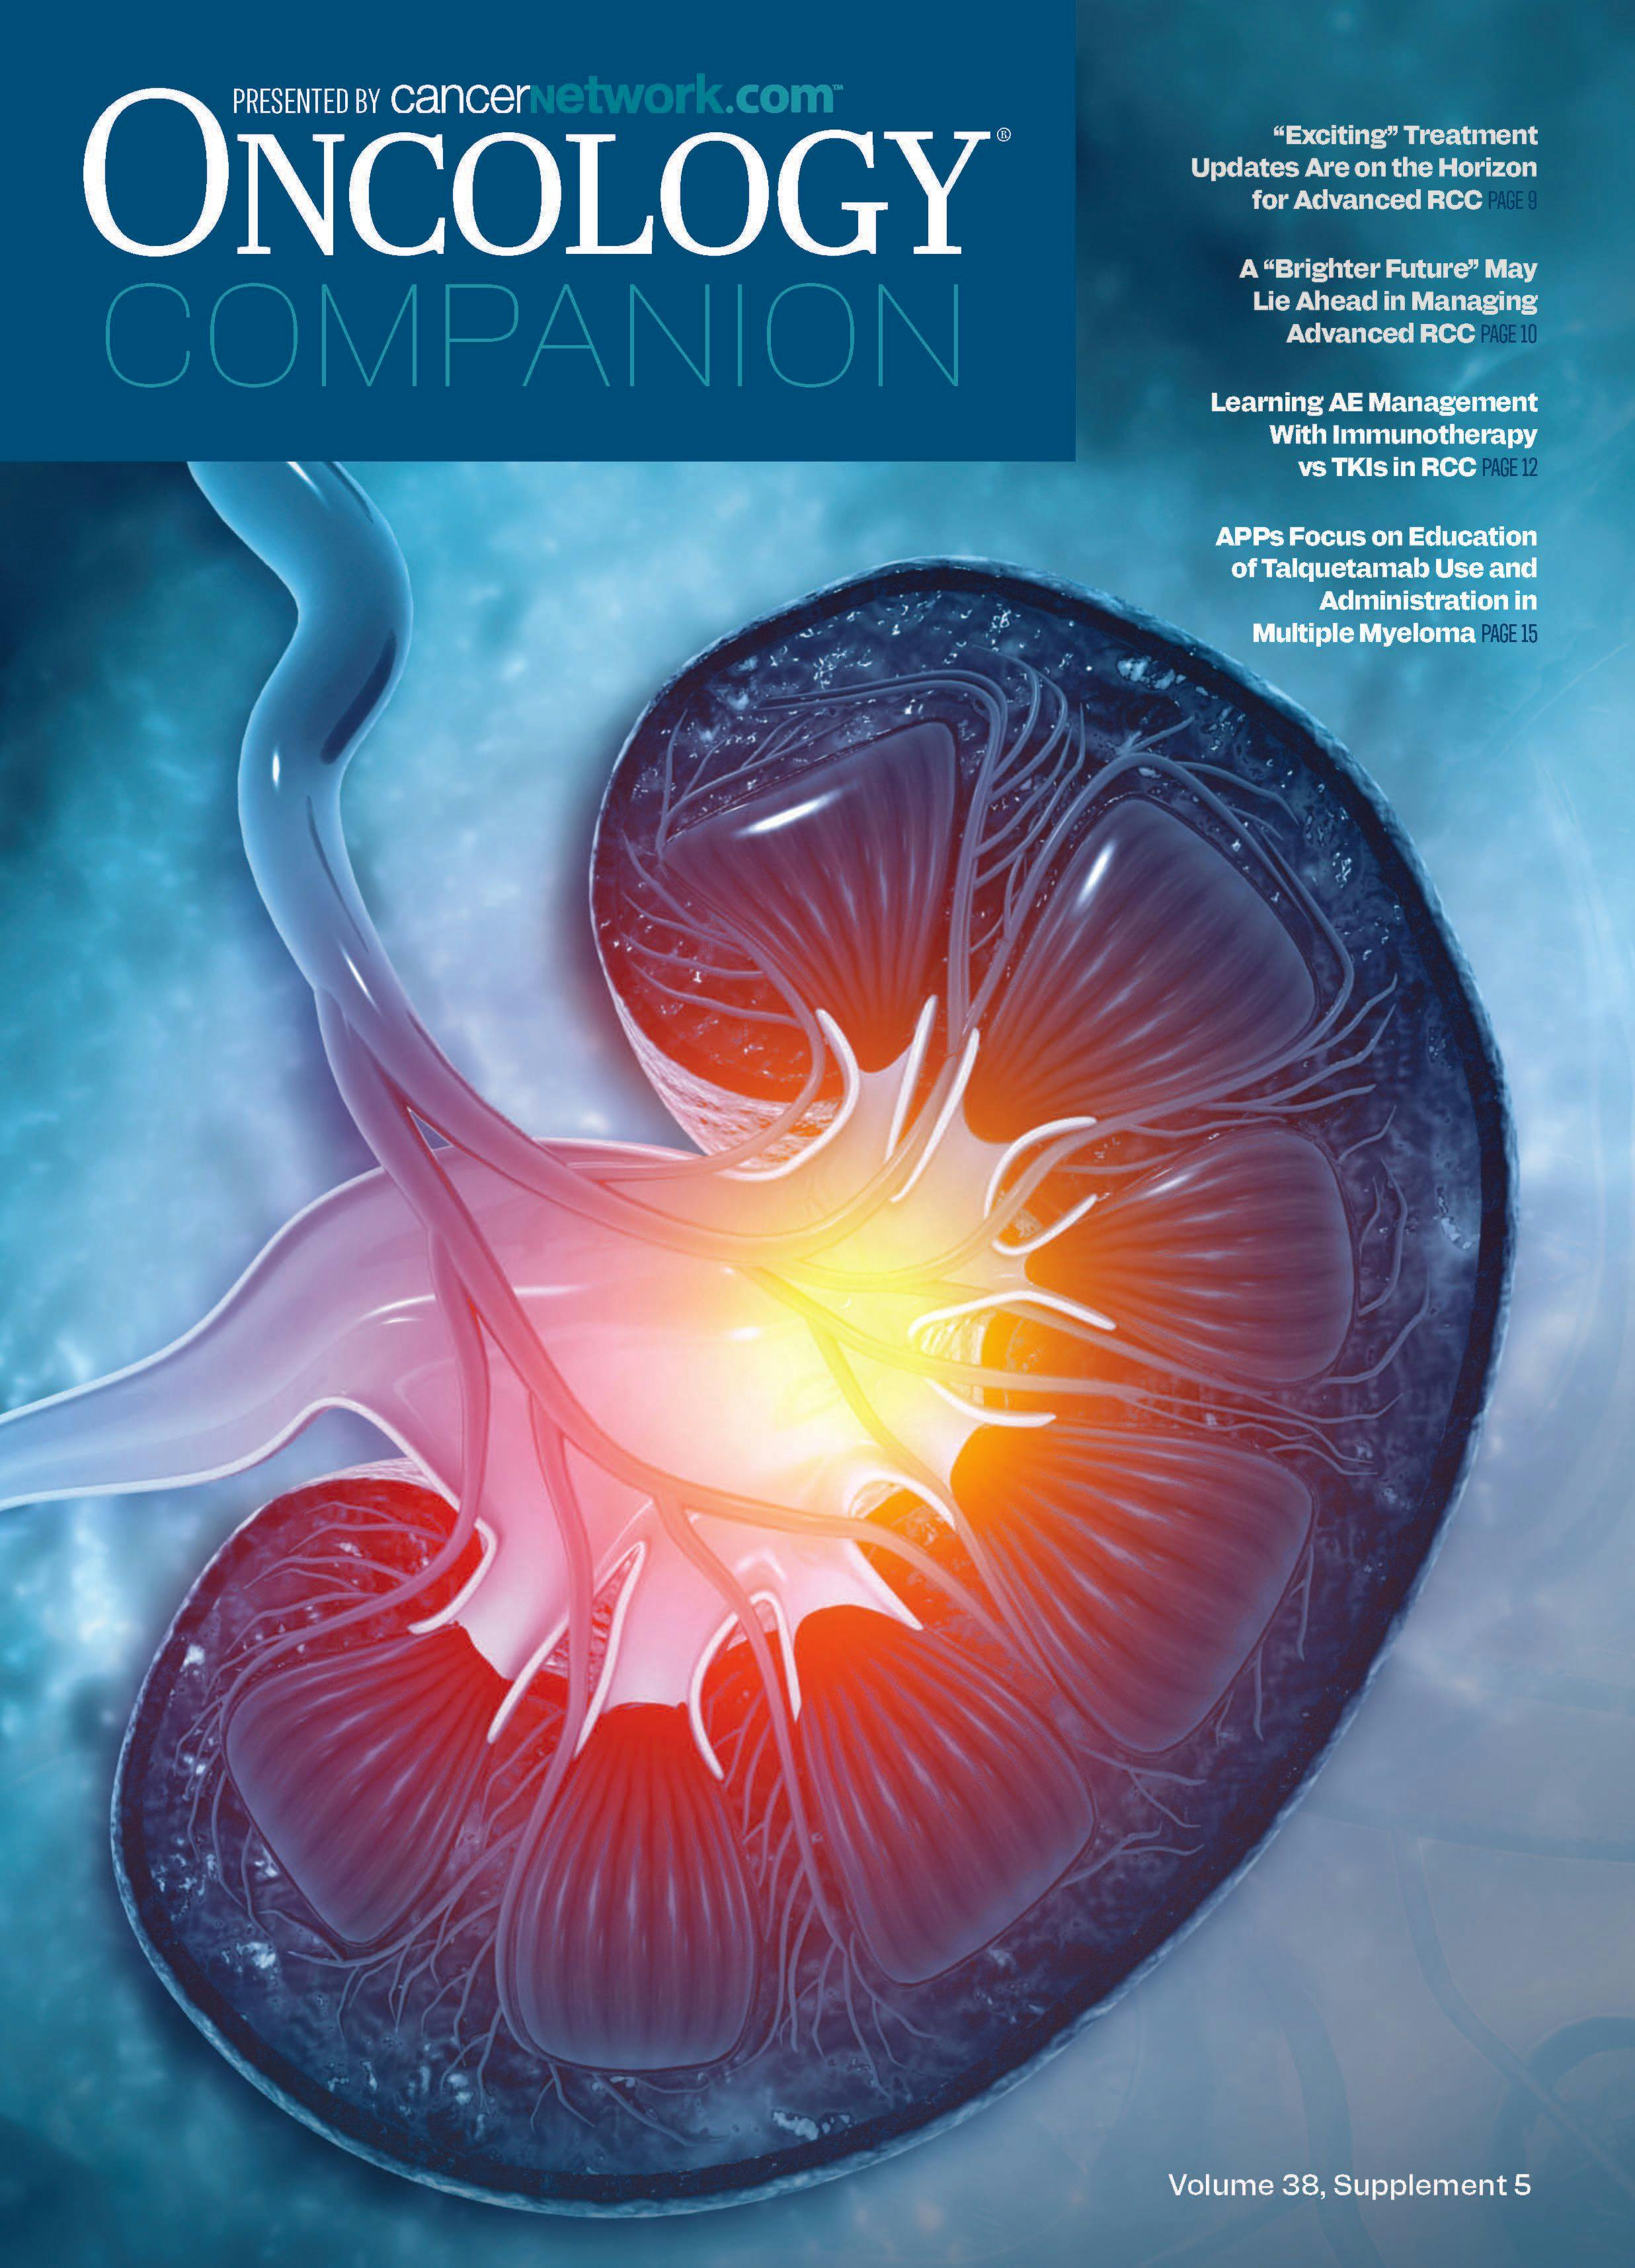 ONCOLOGY® Companion, Volume 38, Supplement 5